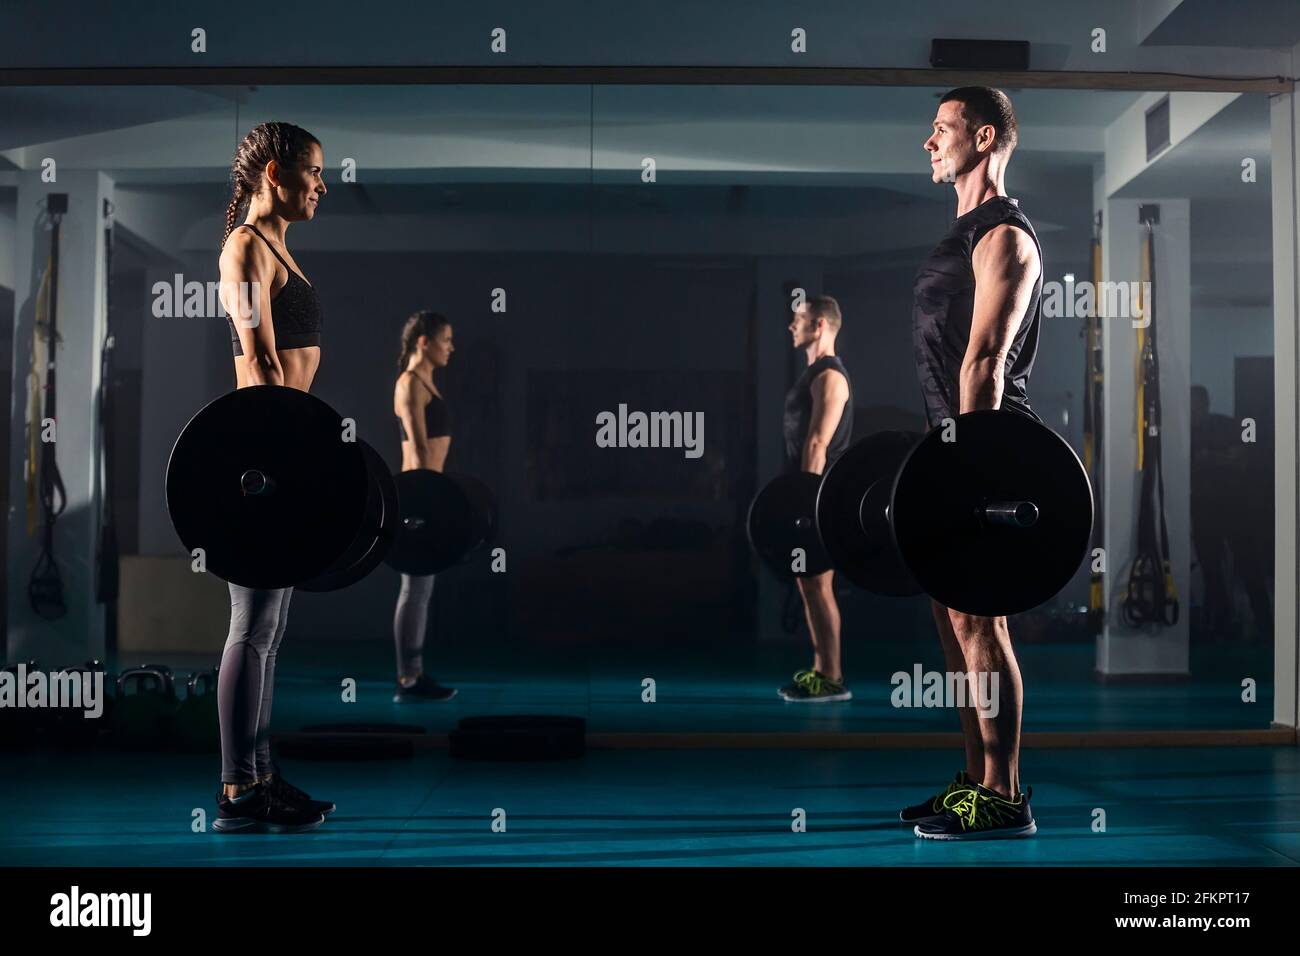 A female and a male training together and simultaneously doing dead-lift exercise at the gym. Stock Photo